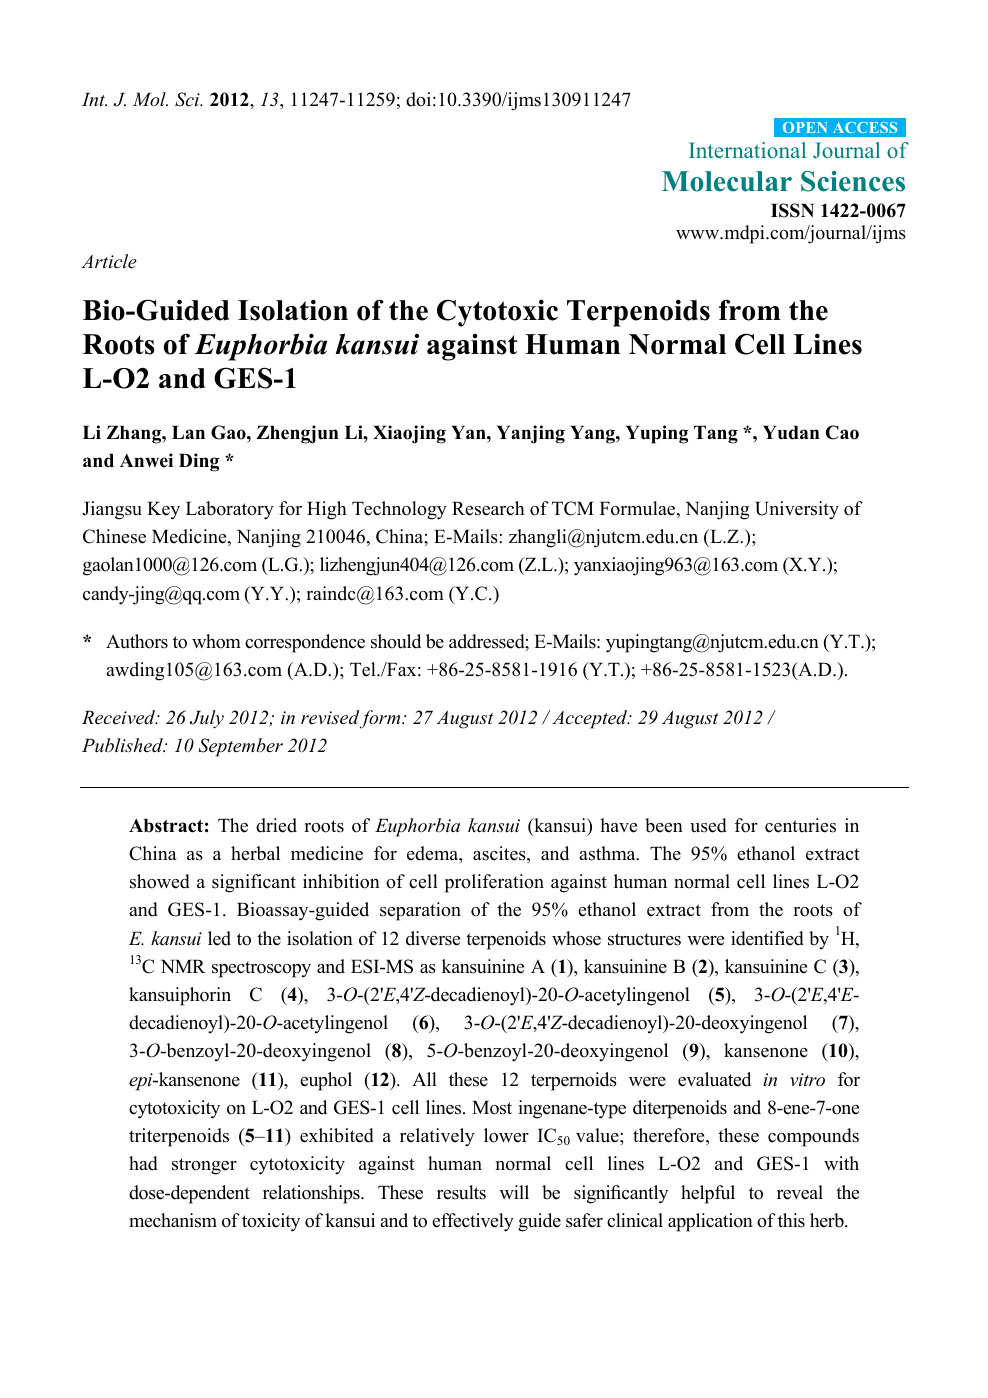 Bio Guided Isolation Of The Cytotoxic Terpenoids From The Roots Of Euphorbia Kansui Against Human Normal Cell Lines L O2 And Ges 1 Topic Of Research Paper In Chemical Sciences Download Scholarly Article Pdf